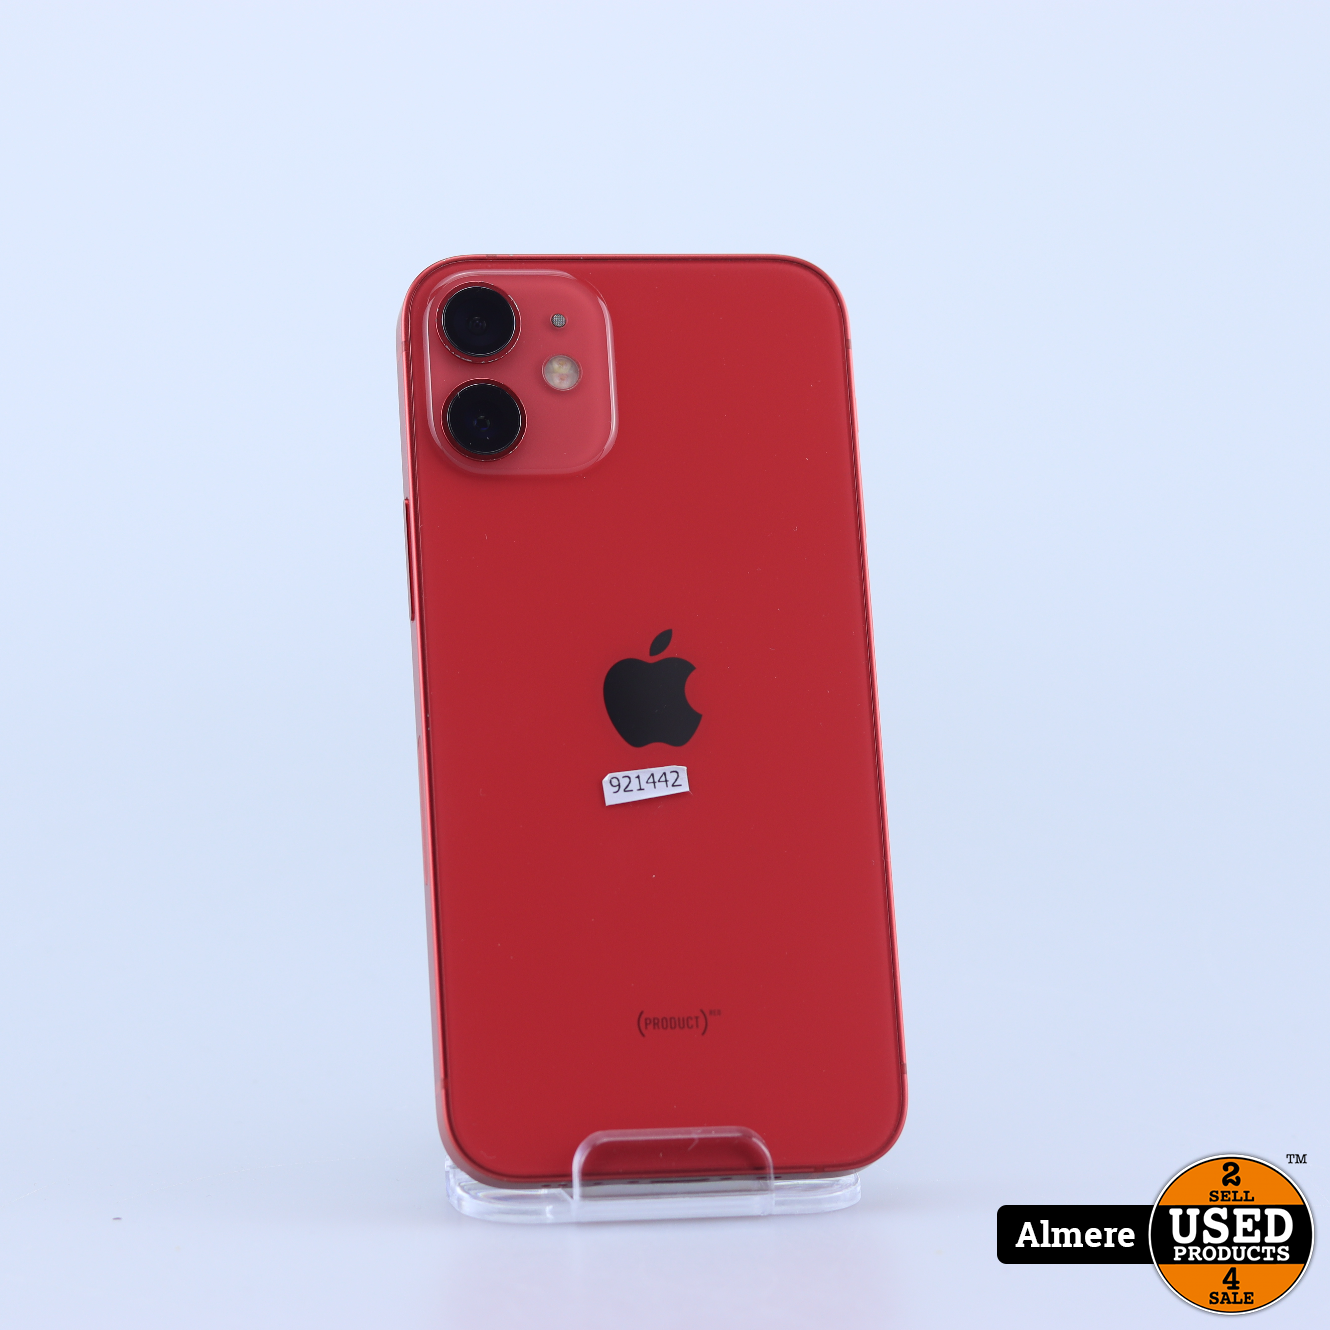 Apple iPhone 12 Mini 128GB Rood | In nette staat - Used Products Almere